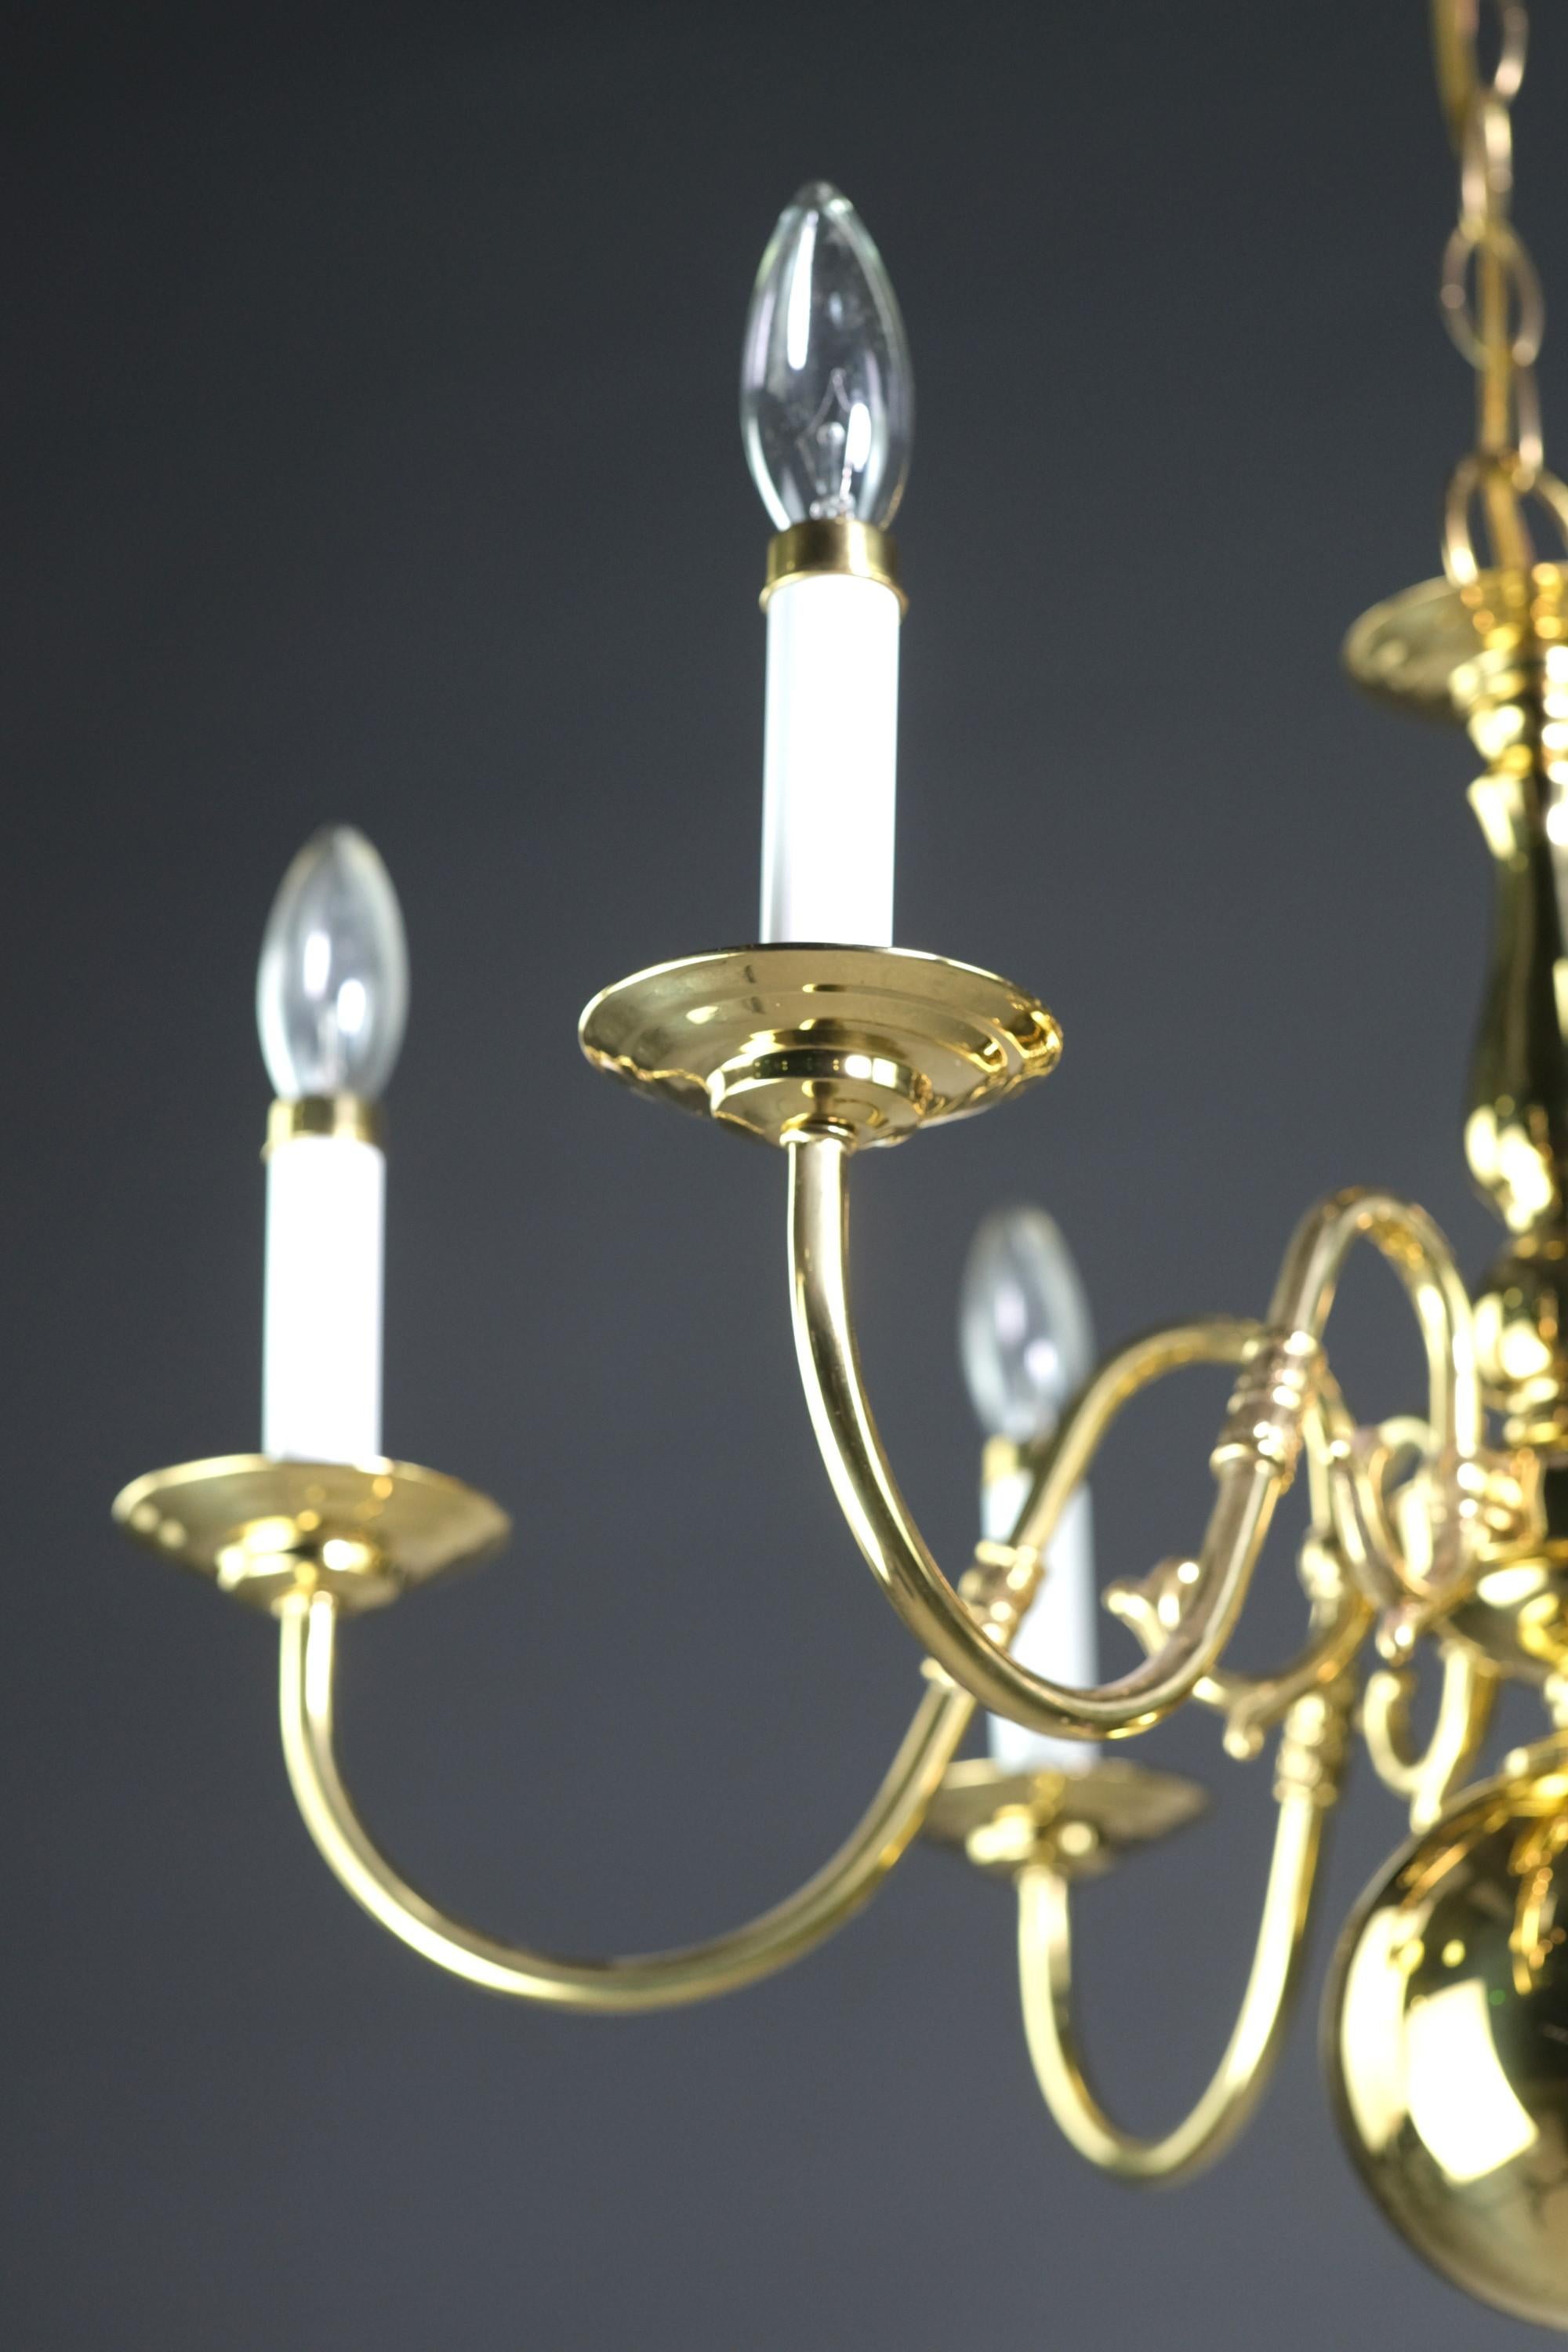 Restored Williamsburg Style Polished Brass Chandelier 6 Arms In Good Condition For Sale In New York, NY